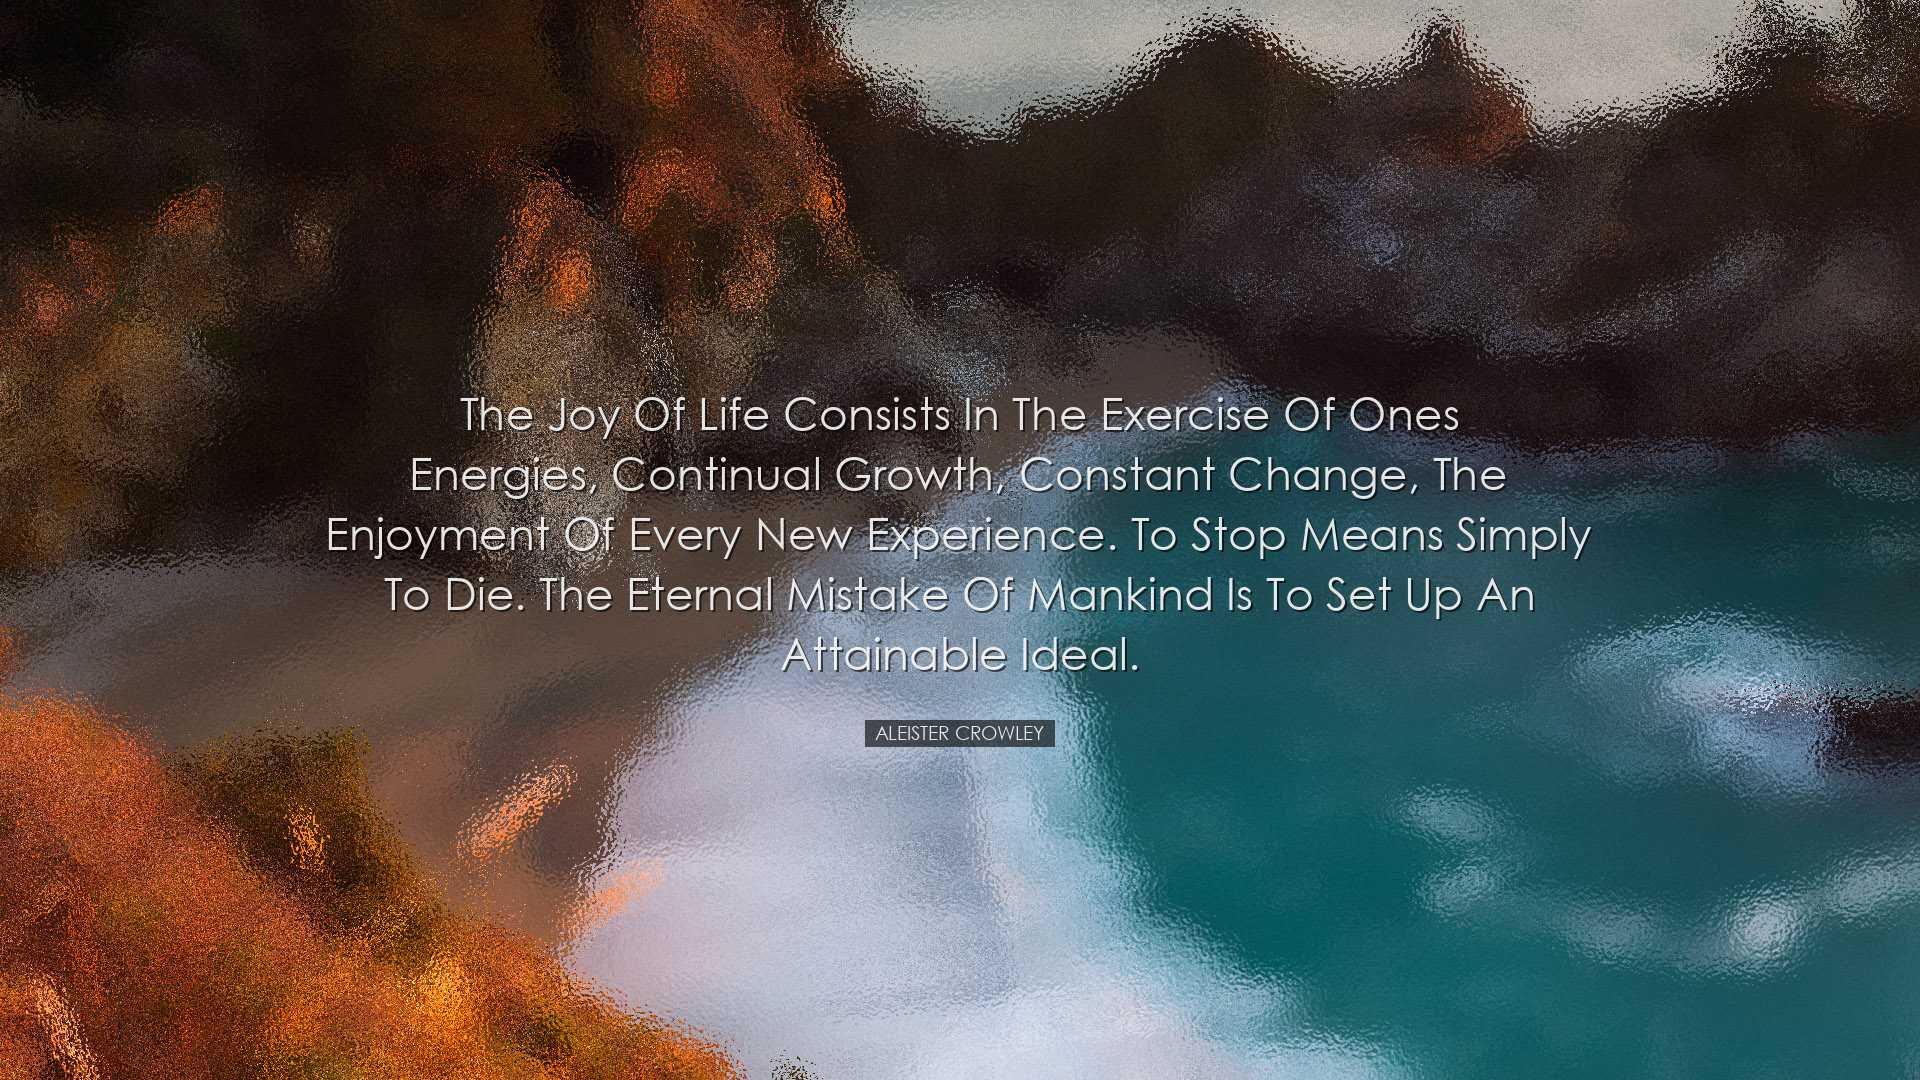 The joy of life consists in the exercise of ones energies, continu